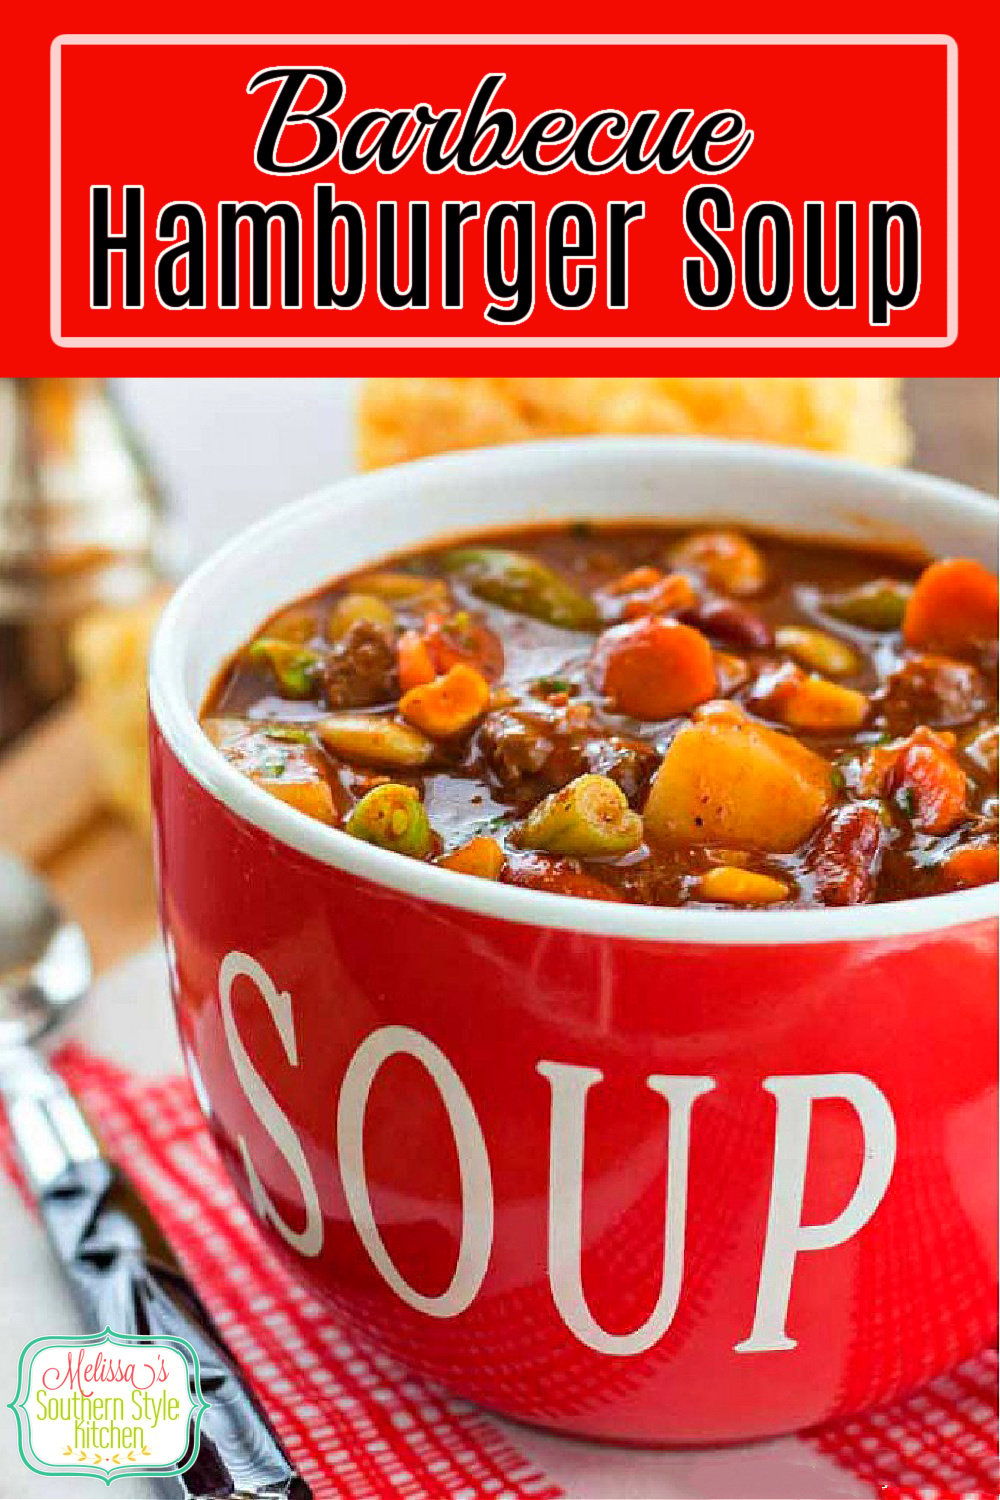 Whip-up a big batch of homemade Barbecue Hamburger Soup and clean out your vegetable bin for a homespun weekday feast #hamburgersoup #barbecue #barbecuesoup #souprecipes #easygroundbeefrecipes #beef #barbecuehamburgersoup